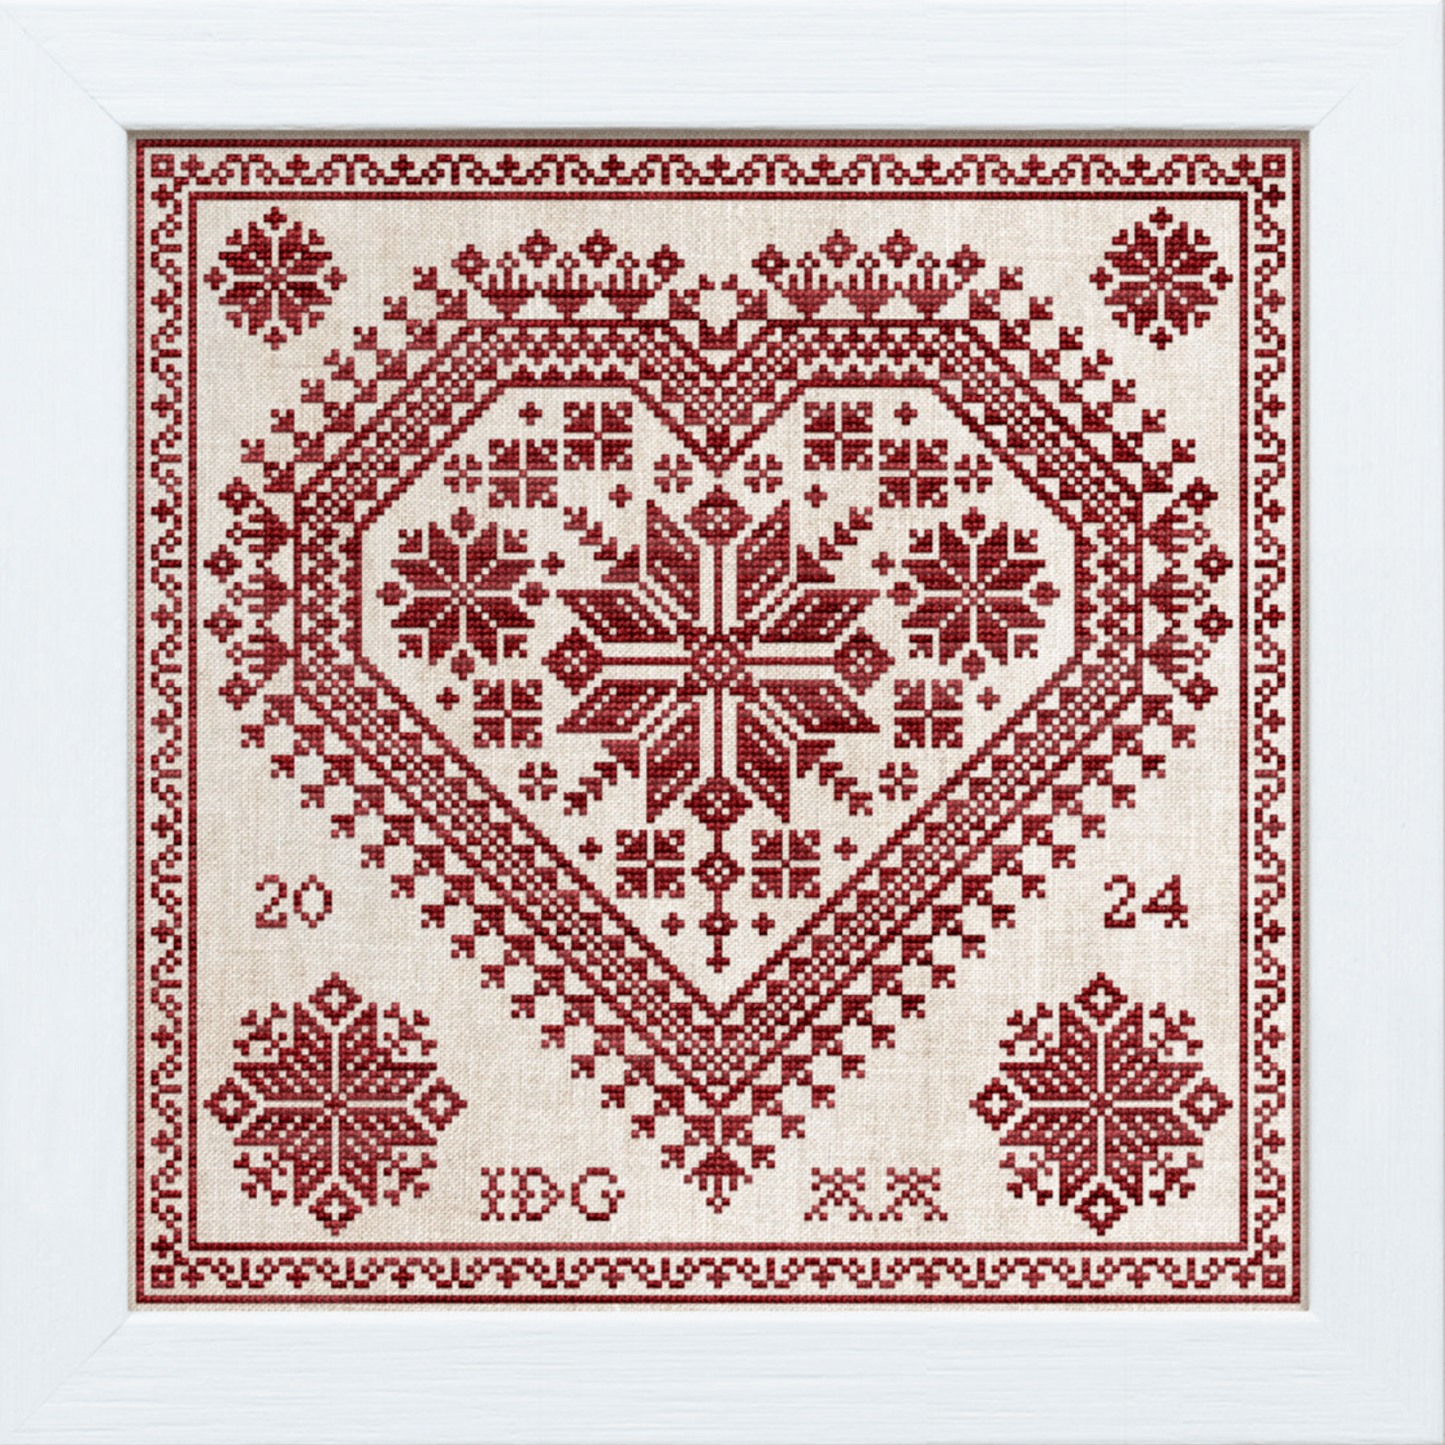 Modern Folk Embroidery - The Nordic Heart - Booklet Chart